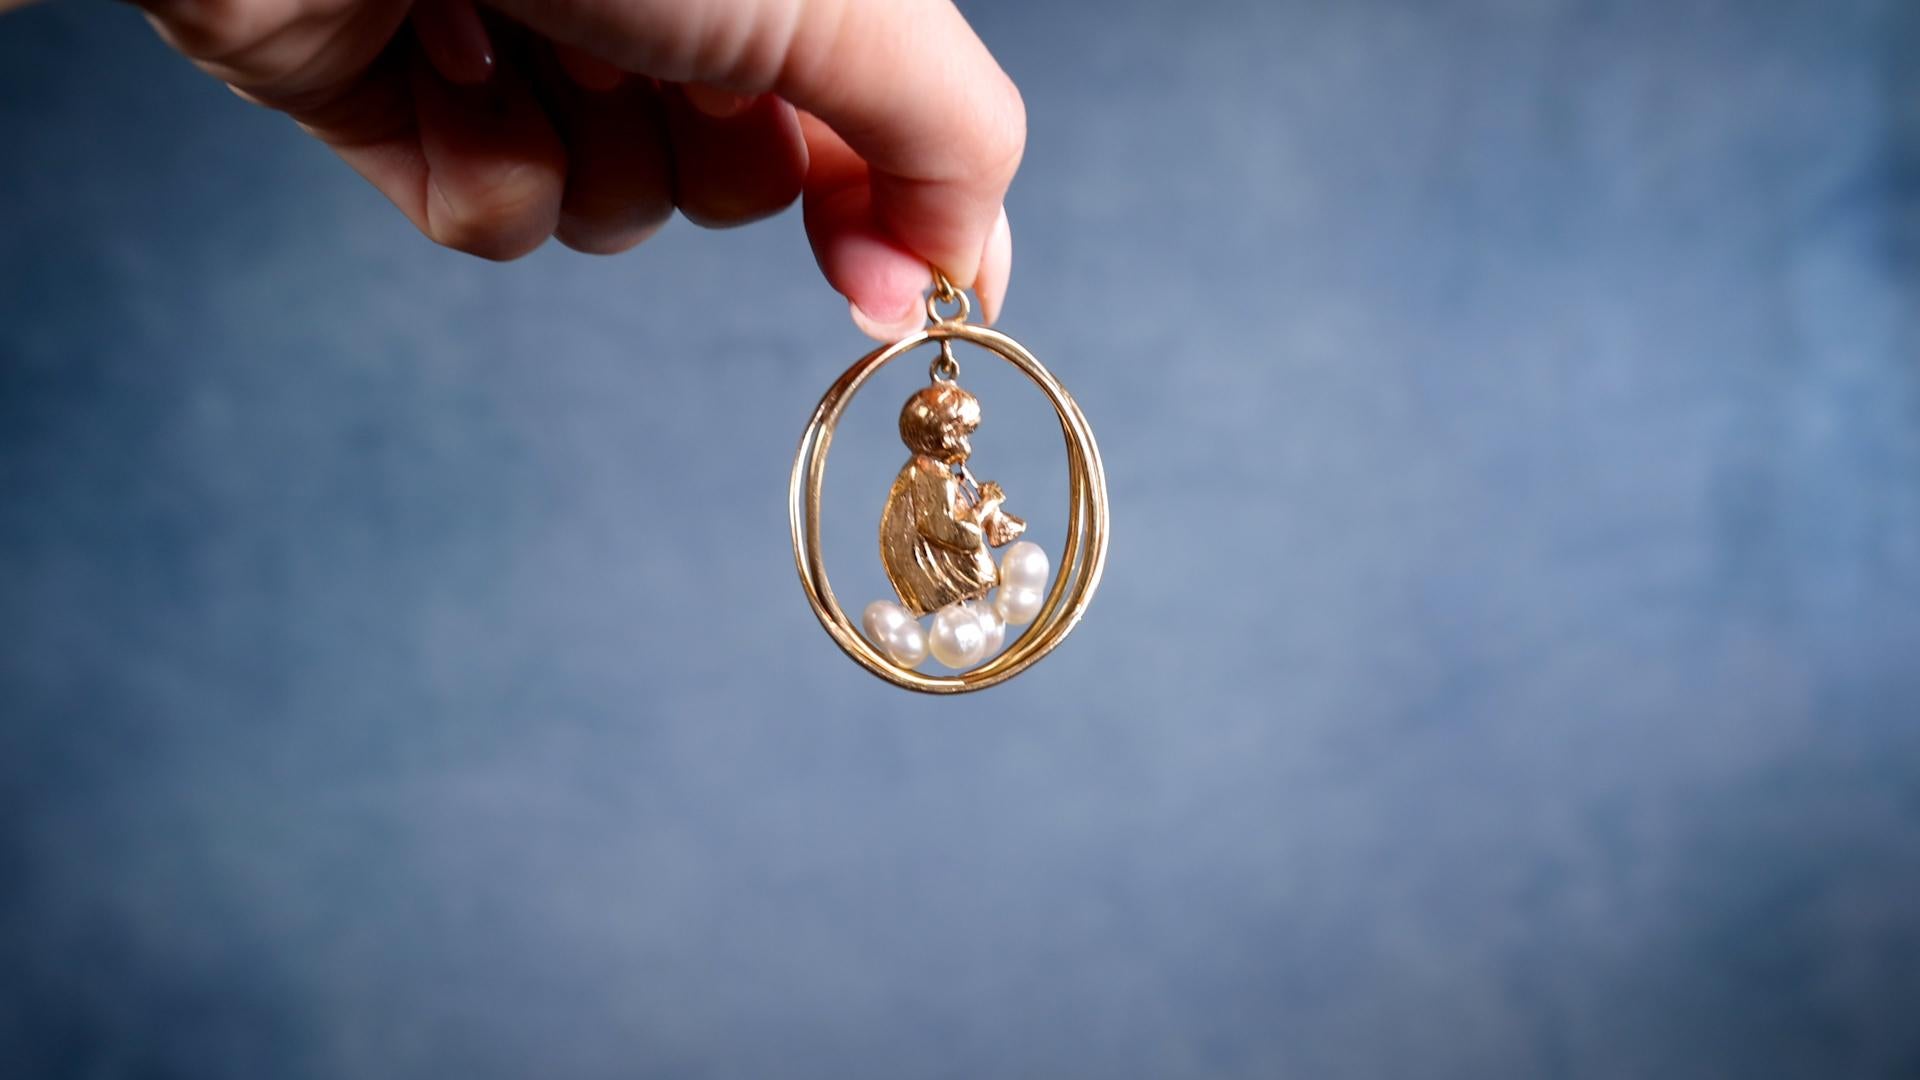 One Mid-Century Sapphire and Pearl Cherub 14k Yellow Gold Pendant. Featuring two round cut sapphires with a total weight of approximately 0.05 carat and three baroque pearls. Crafted in 14 karat yellow gold, weighing 23.72 grams. Circa 1960. The